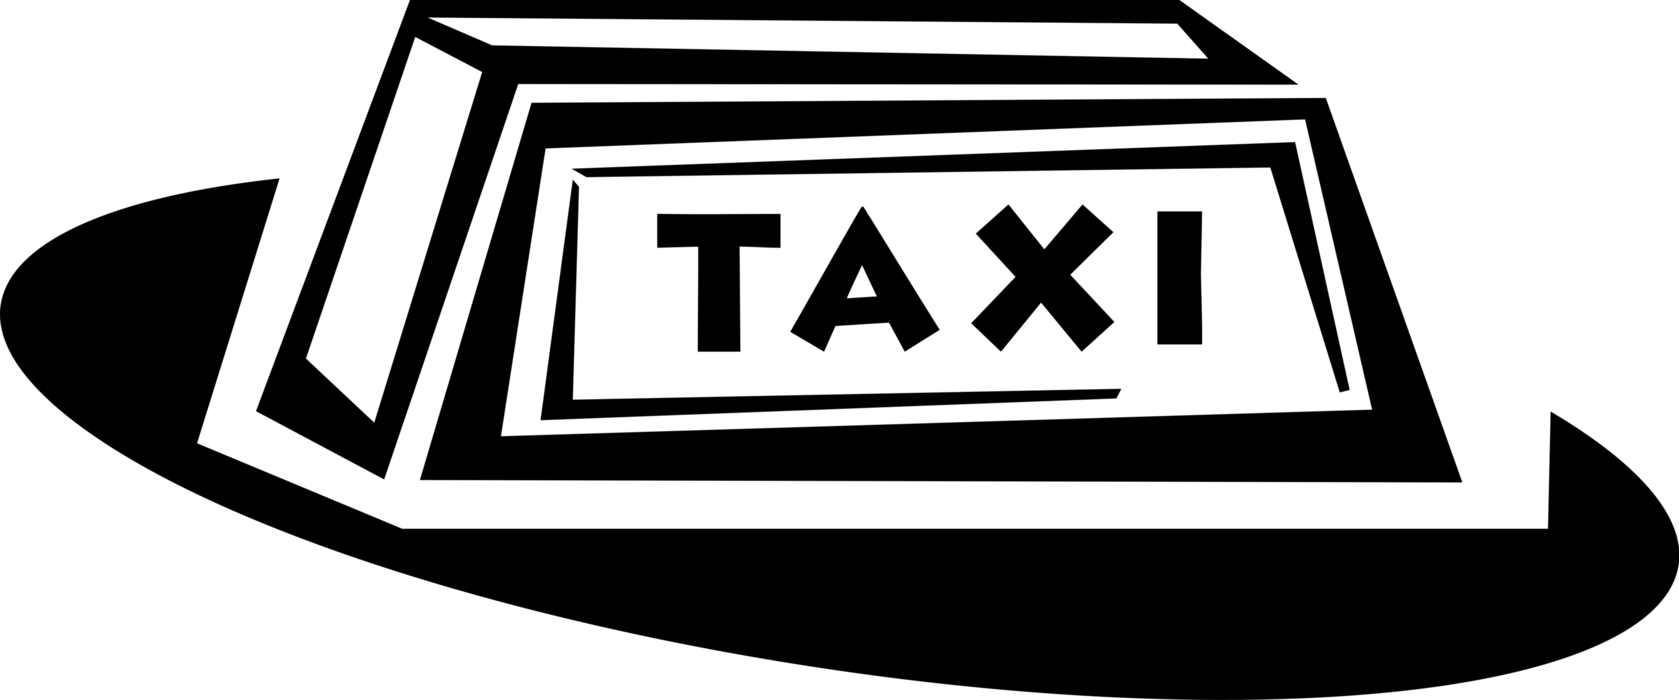 Vector Illustration of Taxicab Taxi or Cab Vehicle for Hire Automobile Motor Car Sign